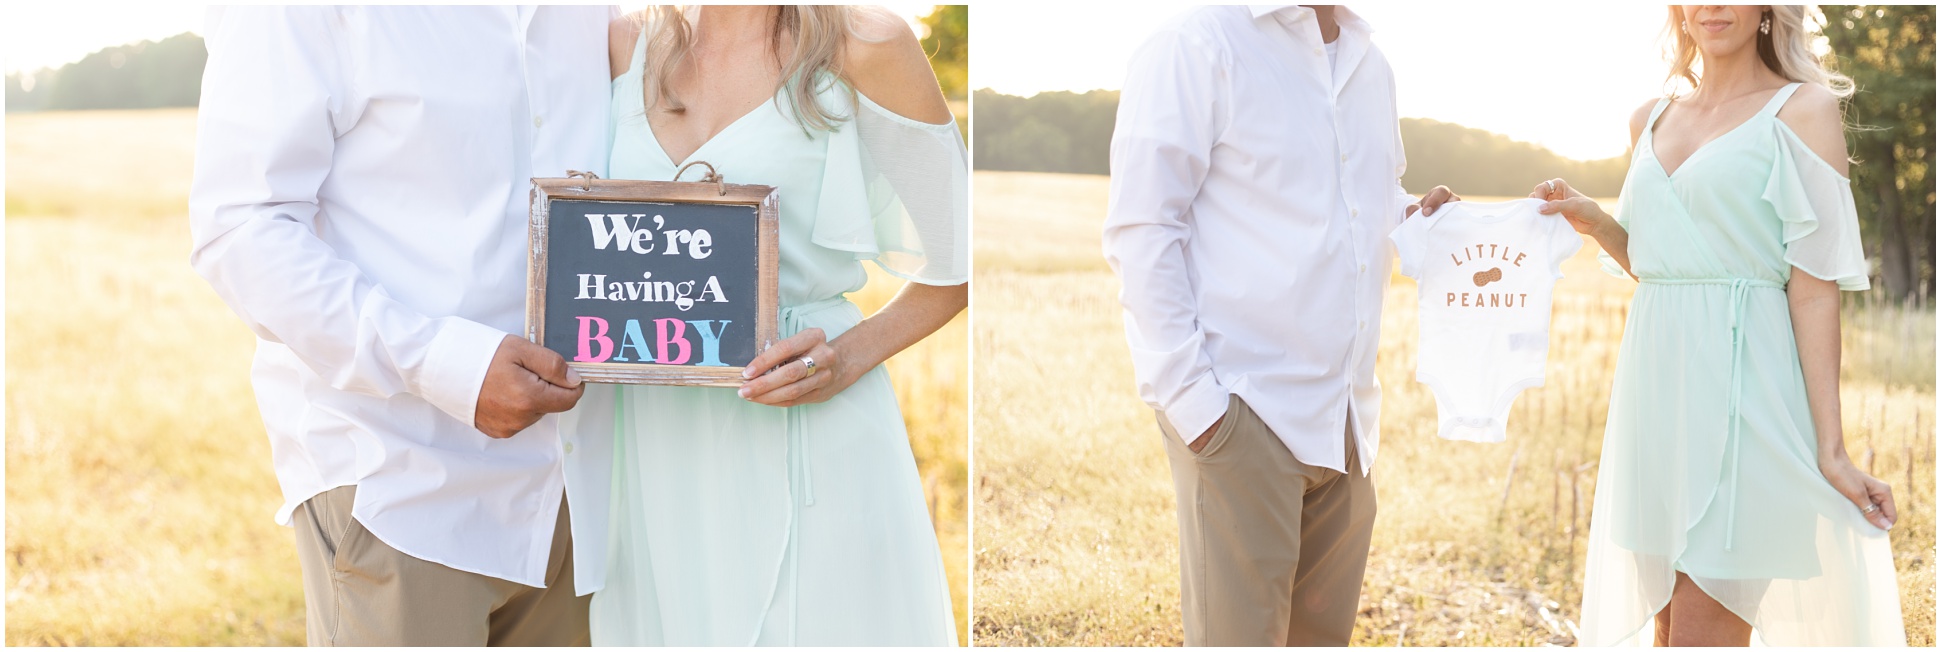 Couple holding onsie and chalk boards announcing pregnancy